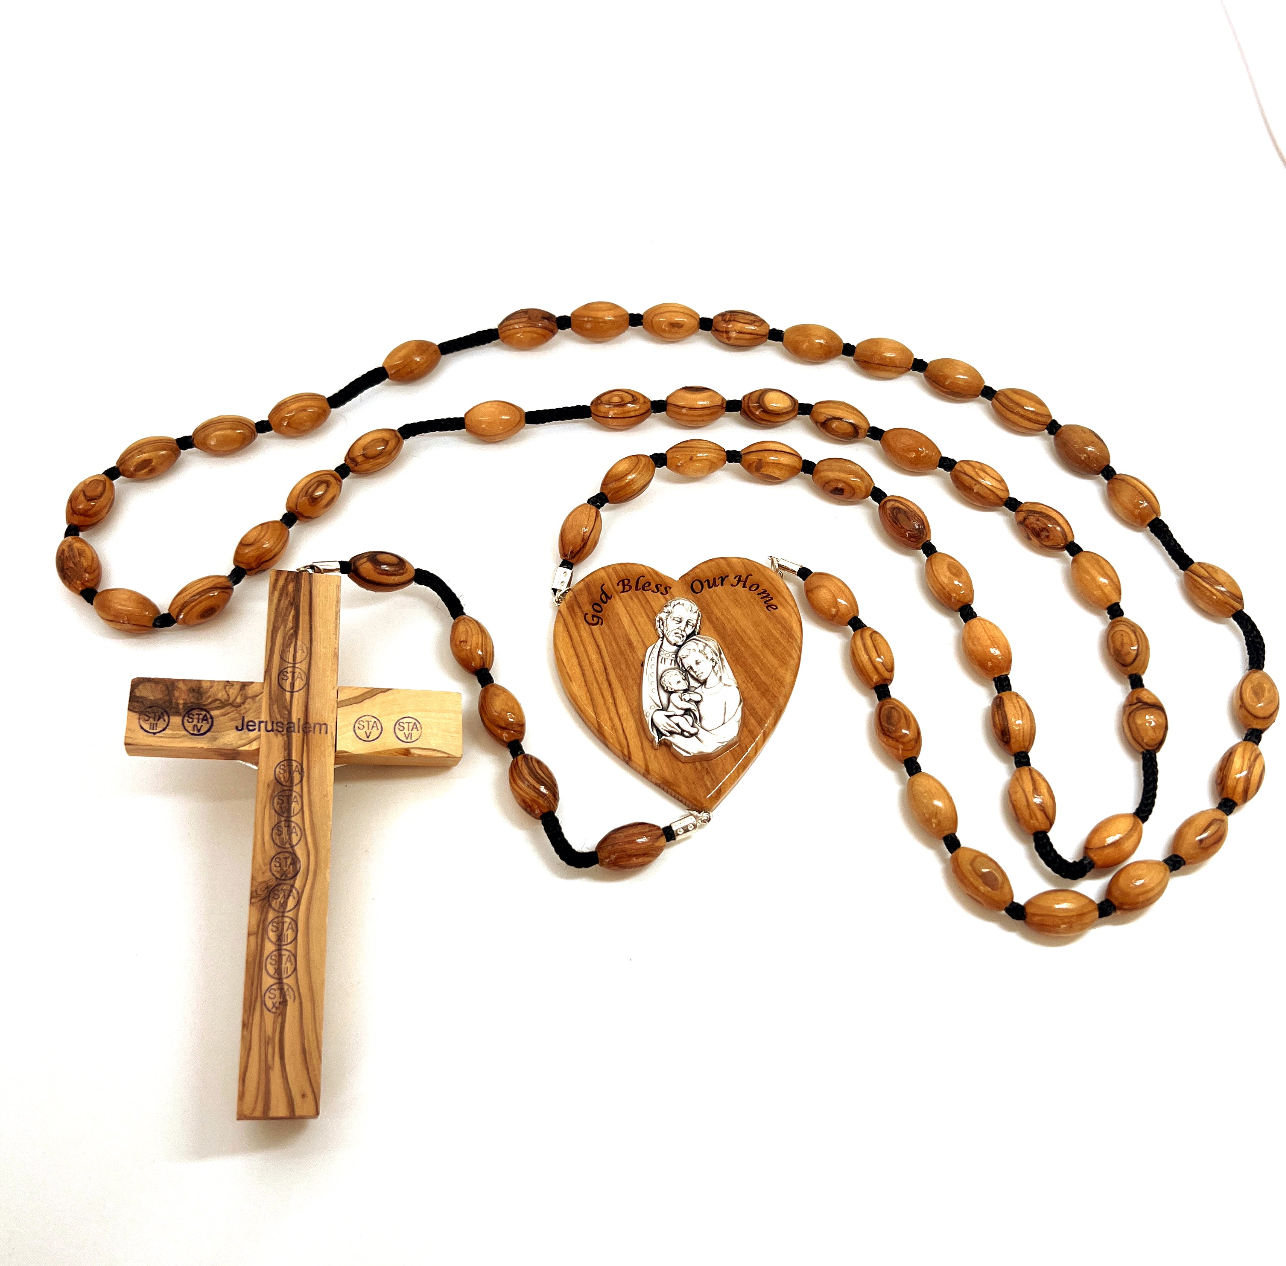 Large Wall Rosary Beads Olive Wood God Bless Our Home  14 stations of cross from Jerusalem 